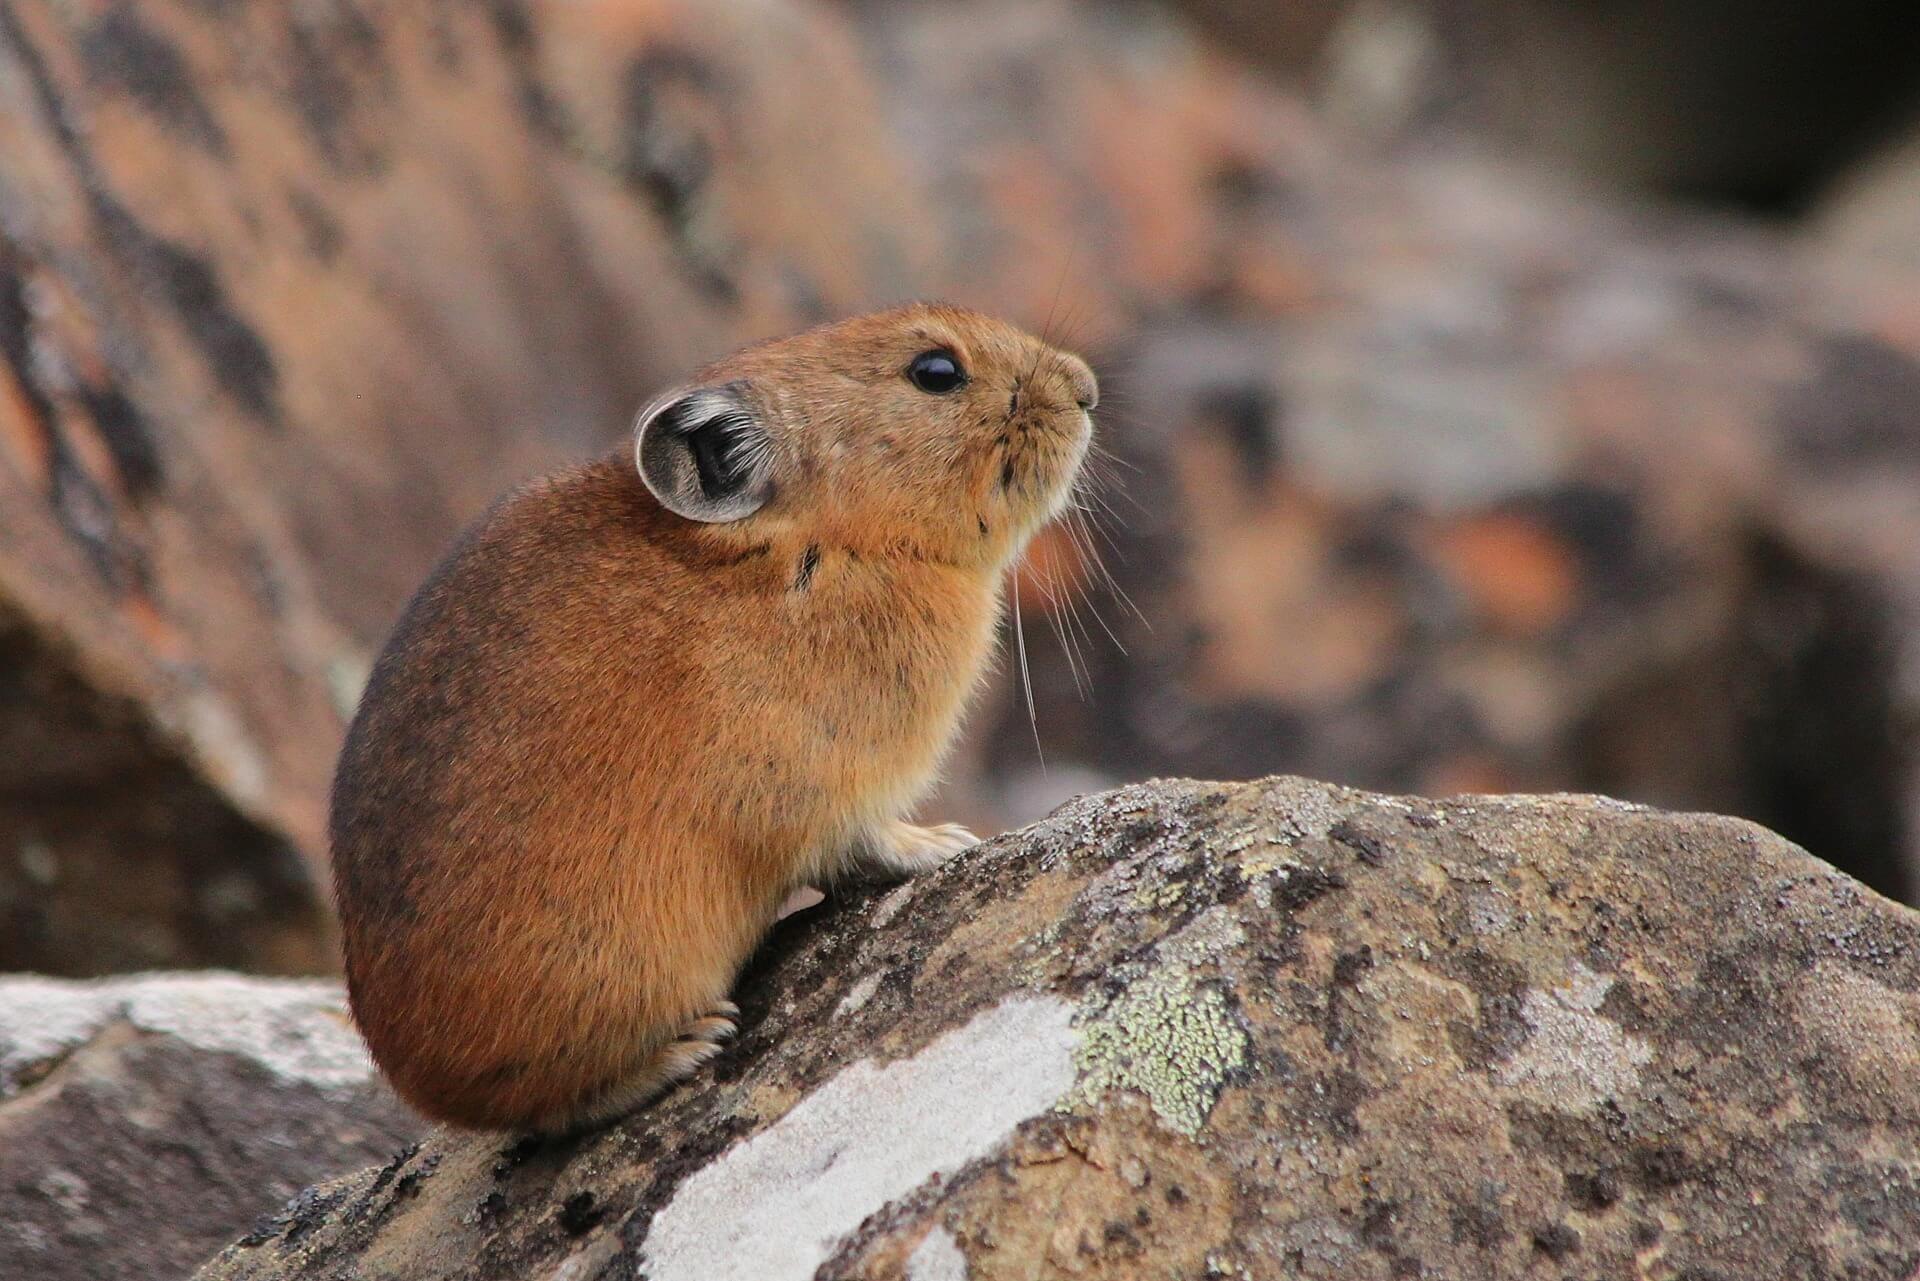 The pika can overheat and die in temperatures as mild as 78 degrees Fahrenheit. Photo/Pexels